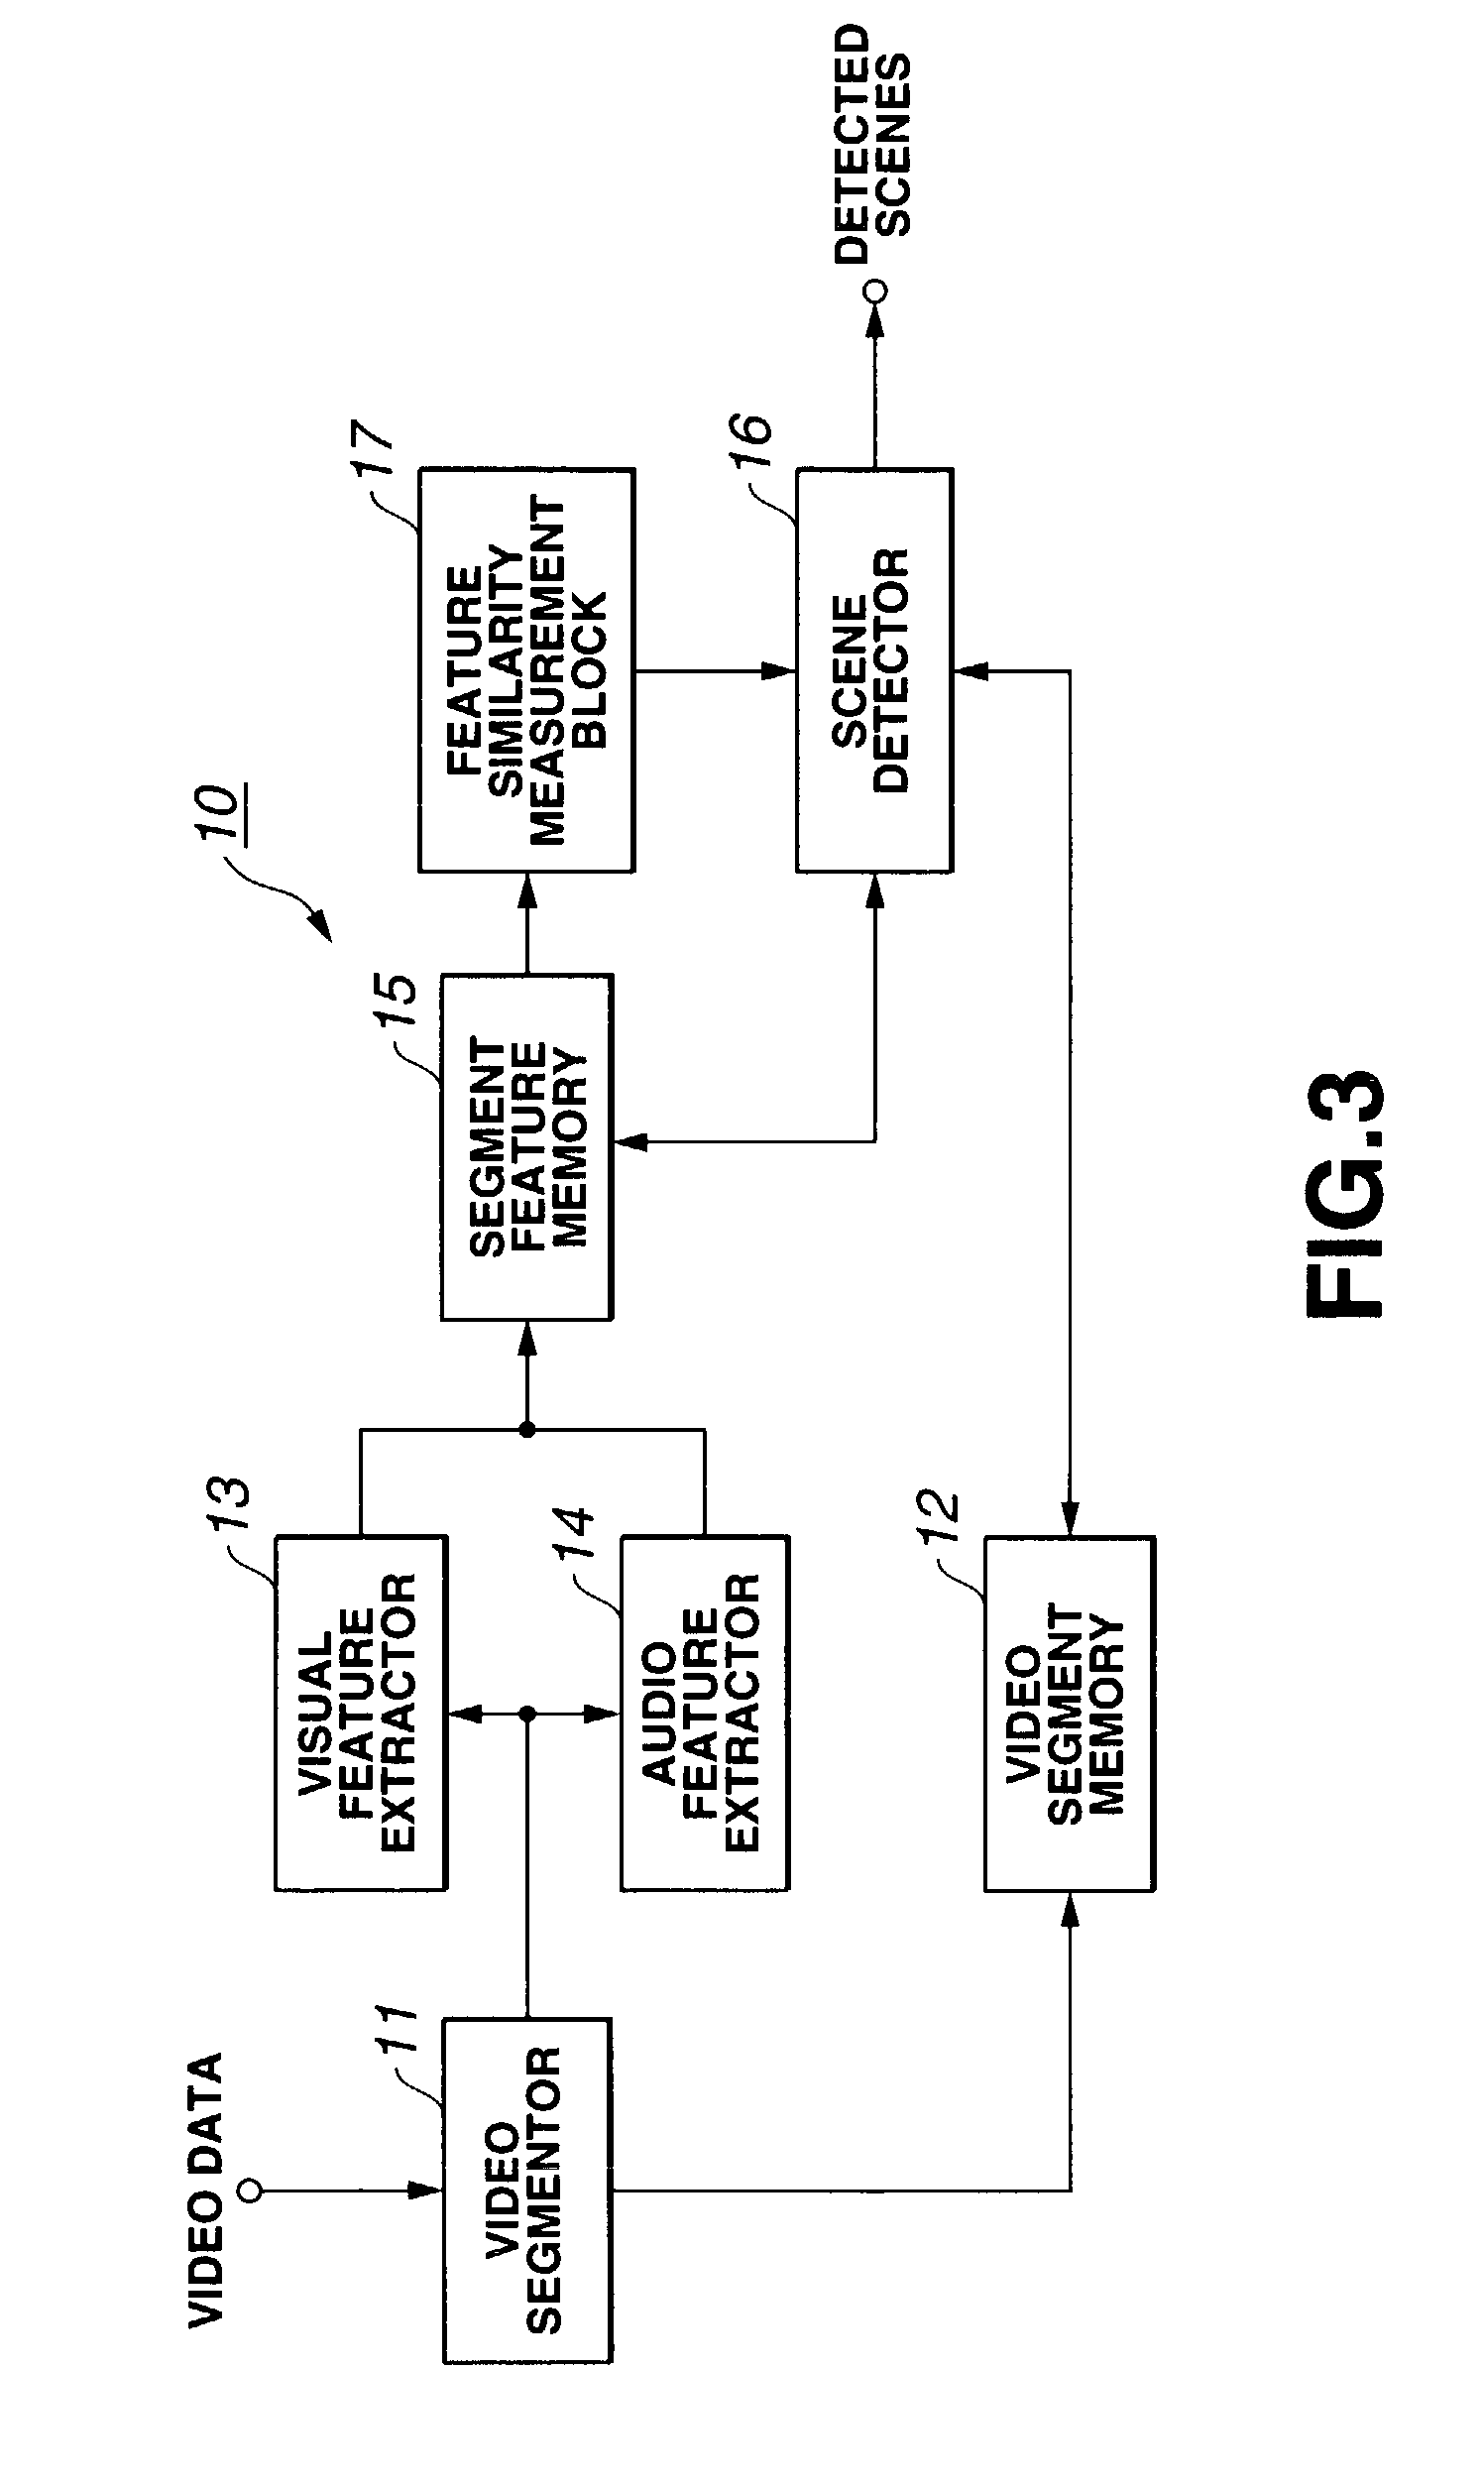 Signal processing method and video signal processor for detecting and analyzing a pattern reflecting the semantics of the content of a signal